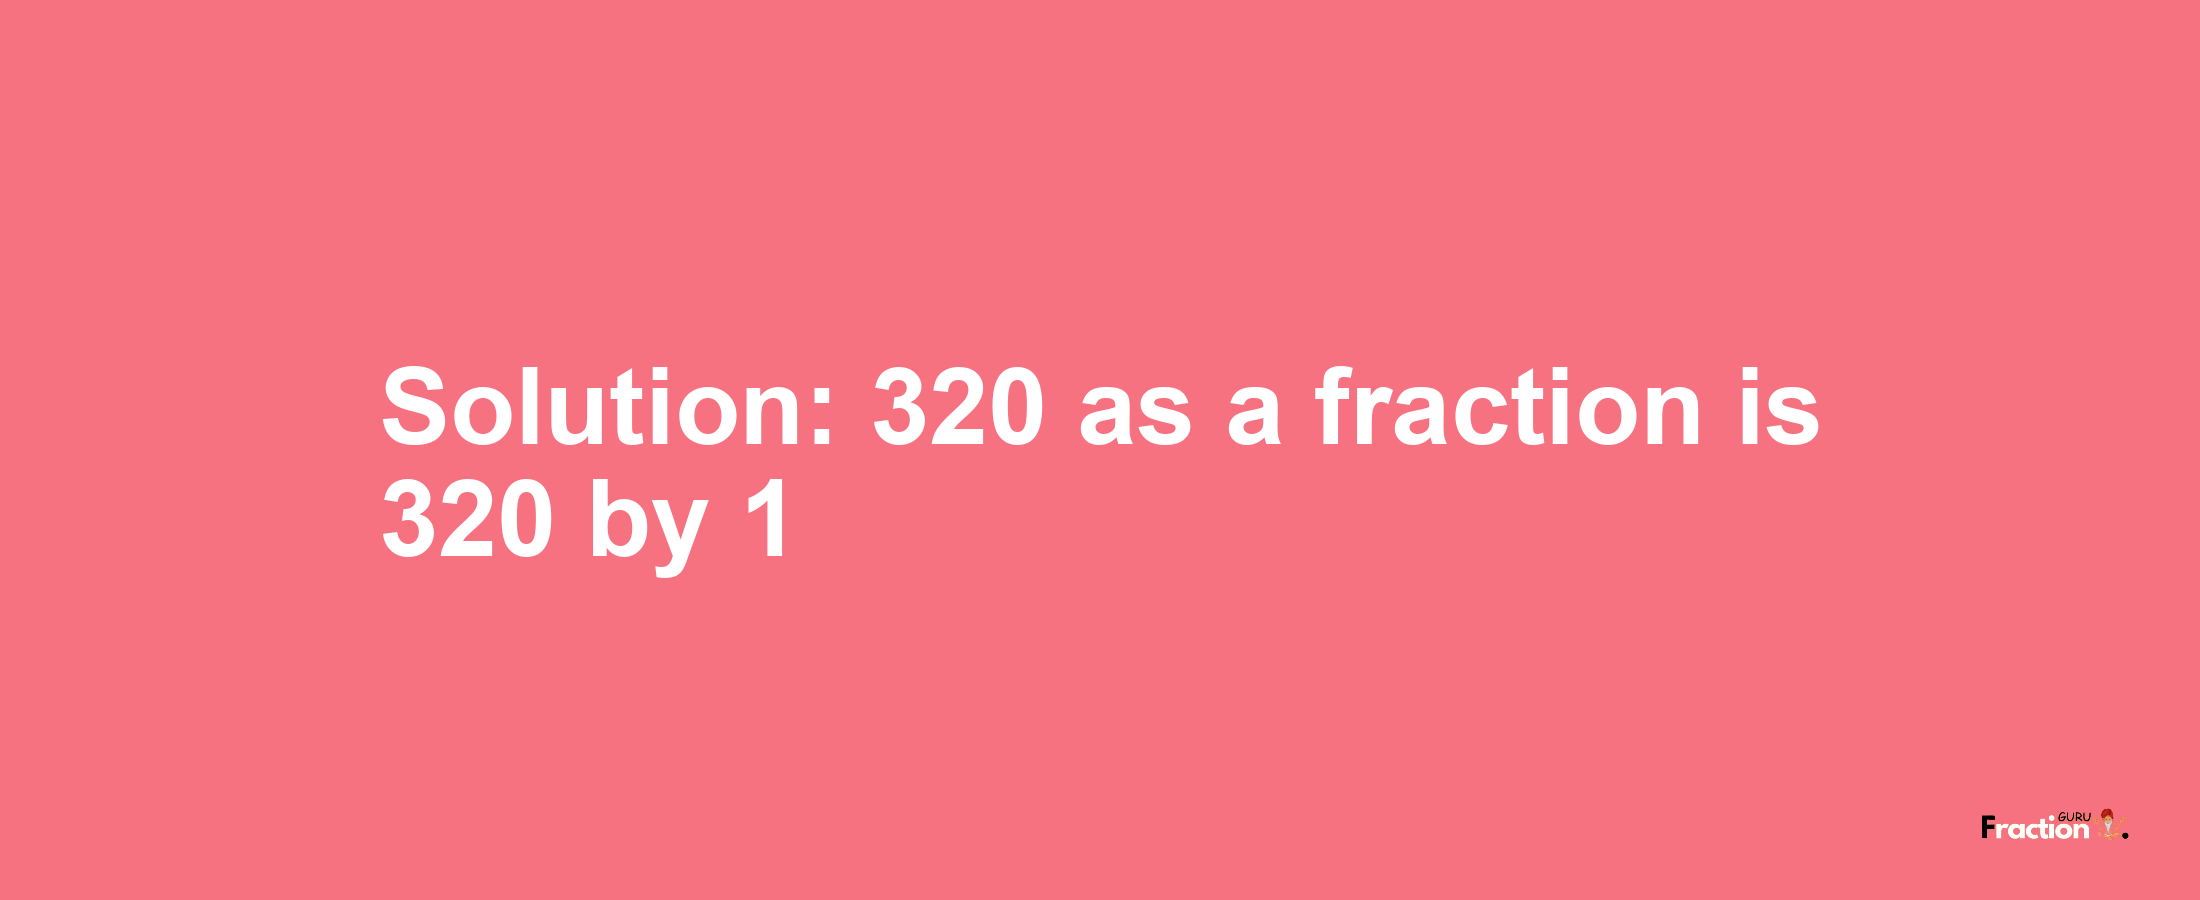 Solution:320 as a fraction is 320/1